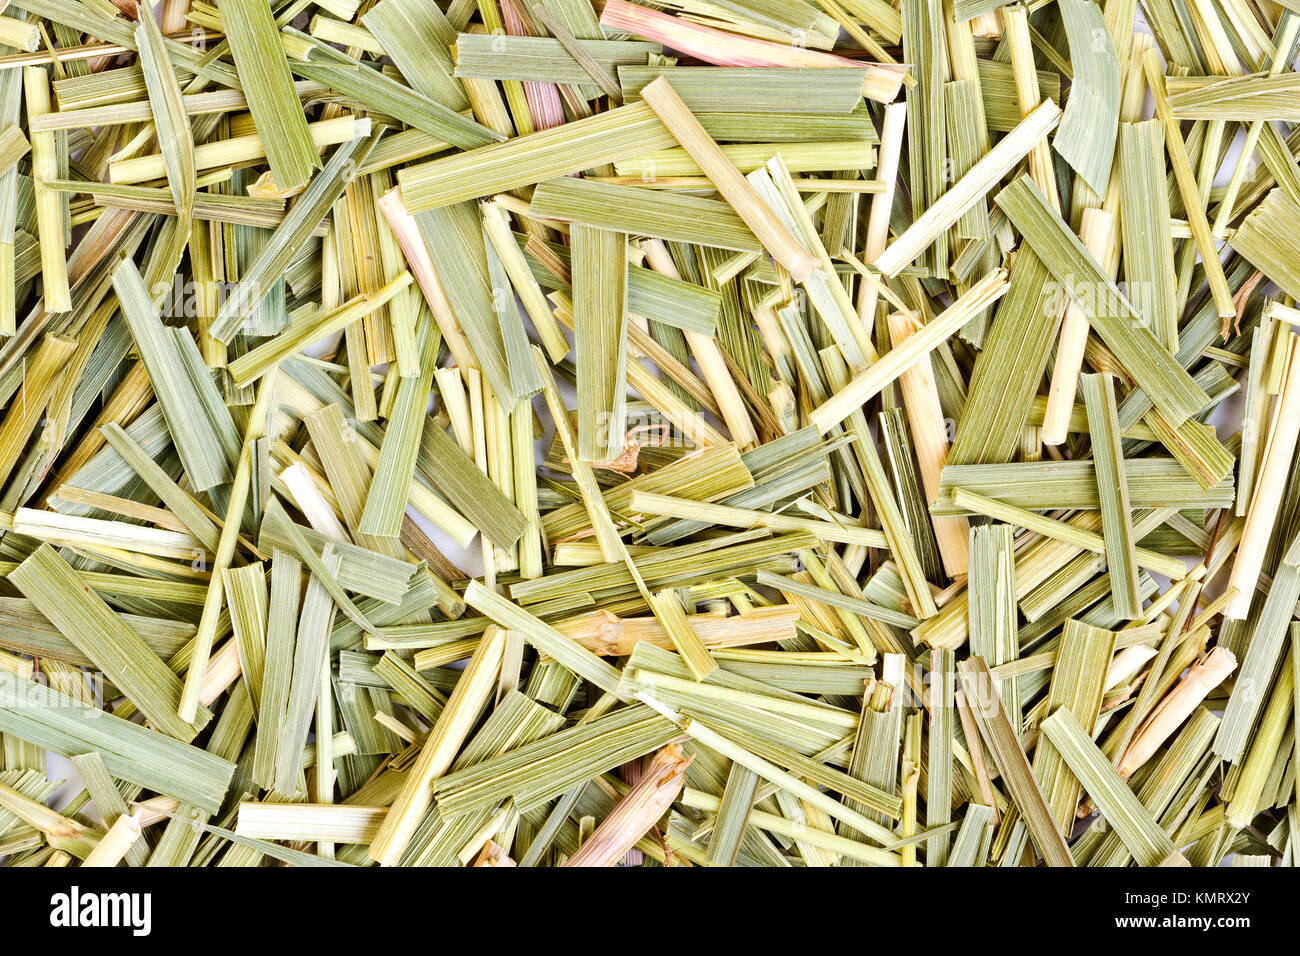 Sweetgrass for medical use. Close-up photo. Stock Photo